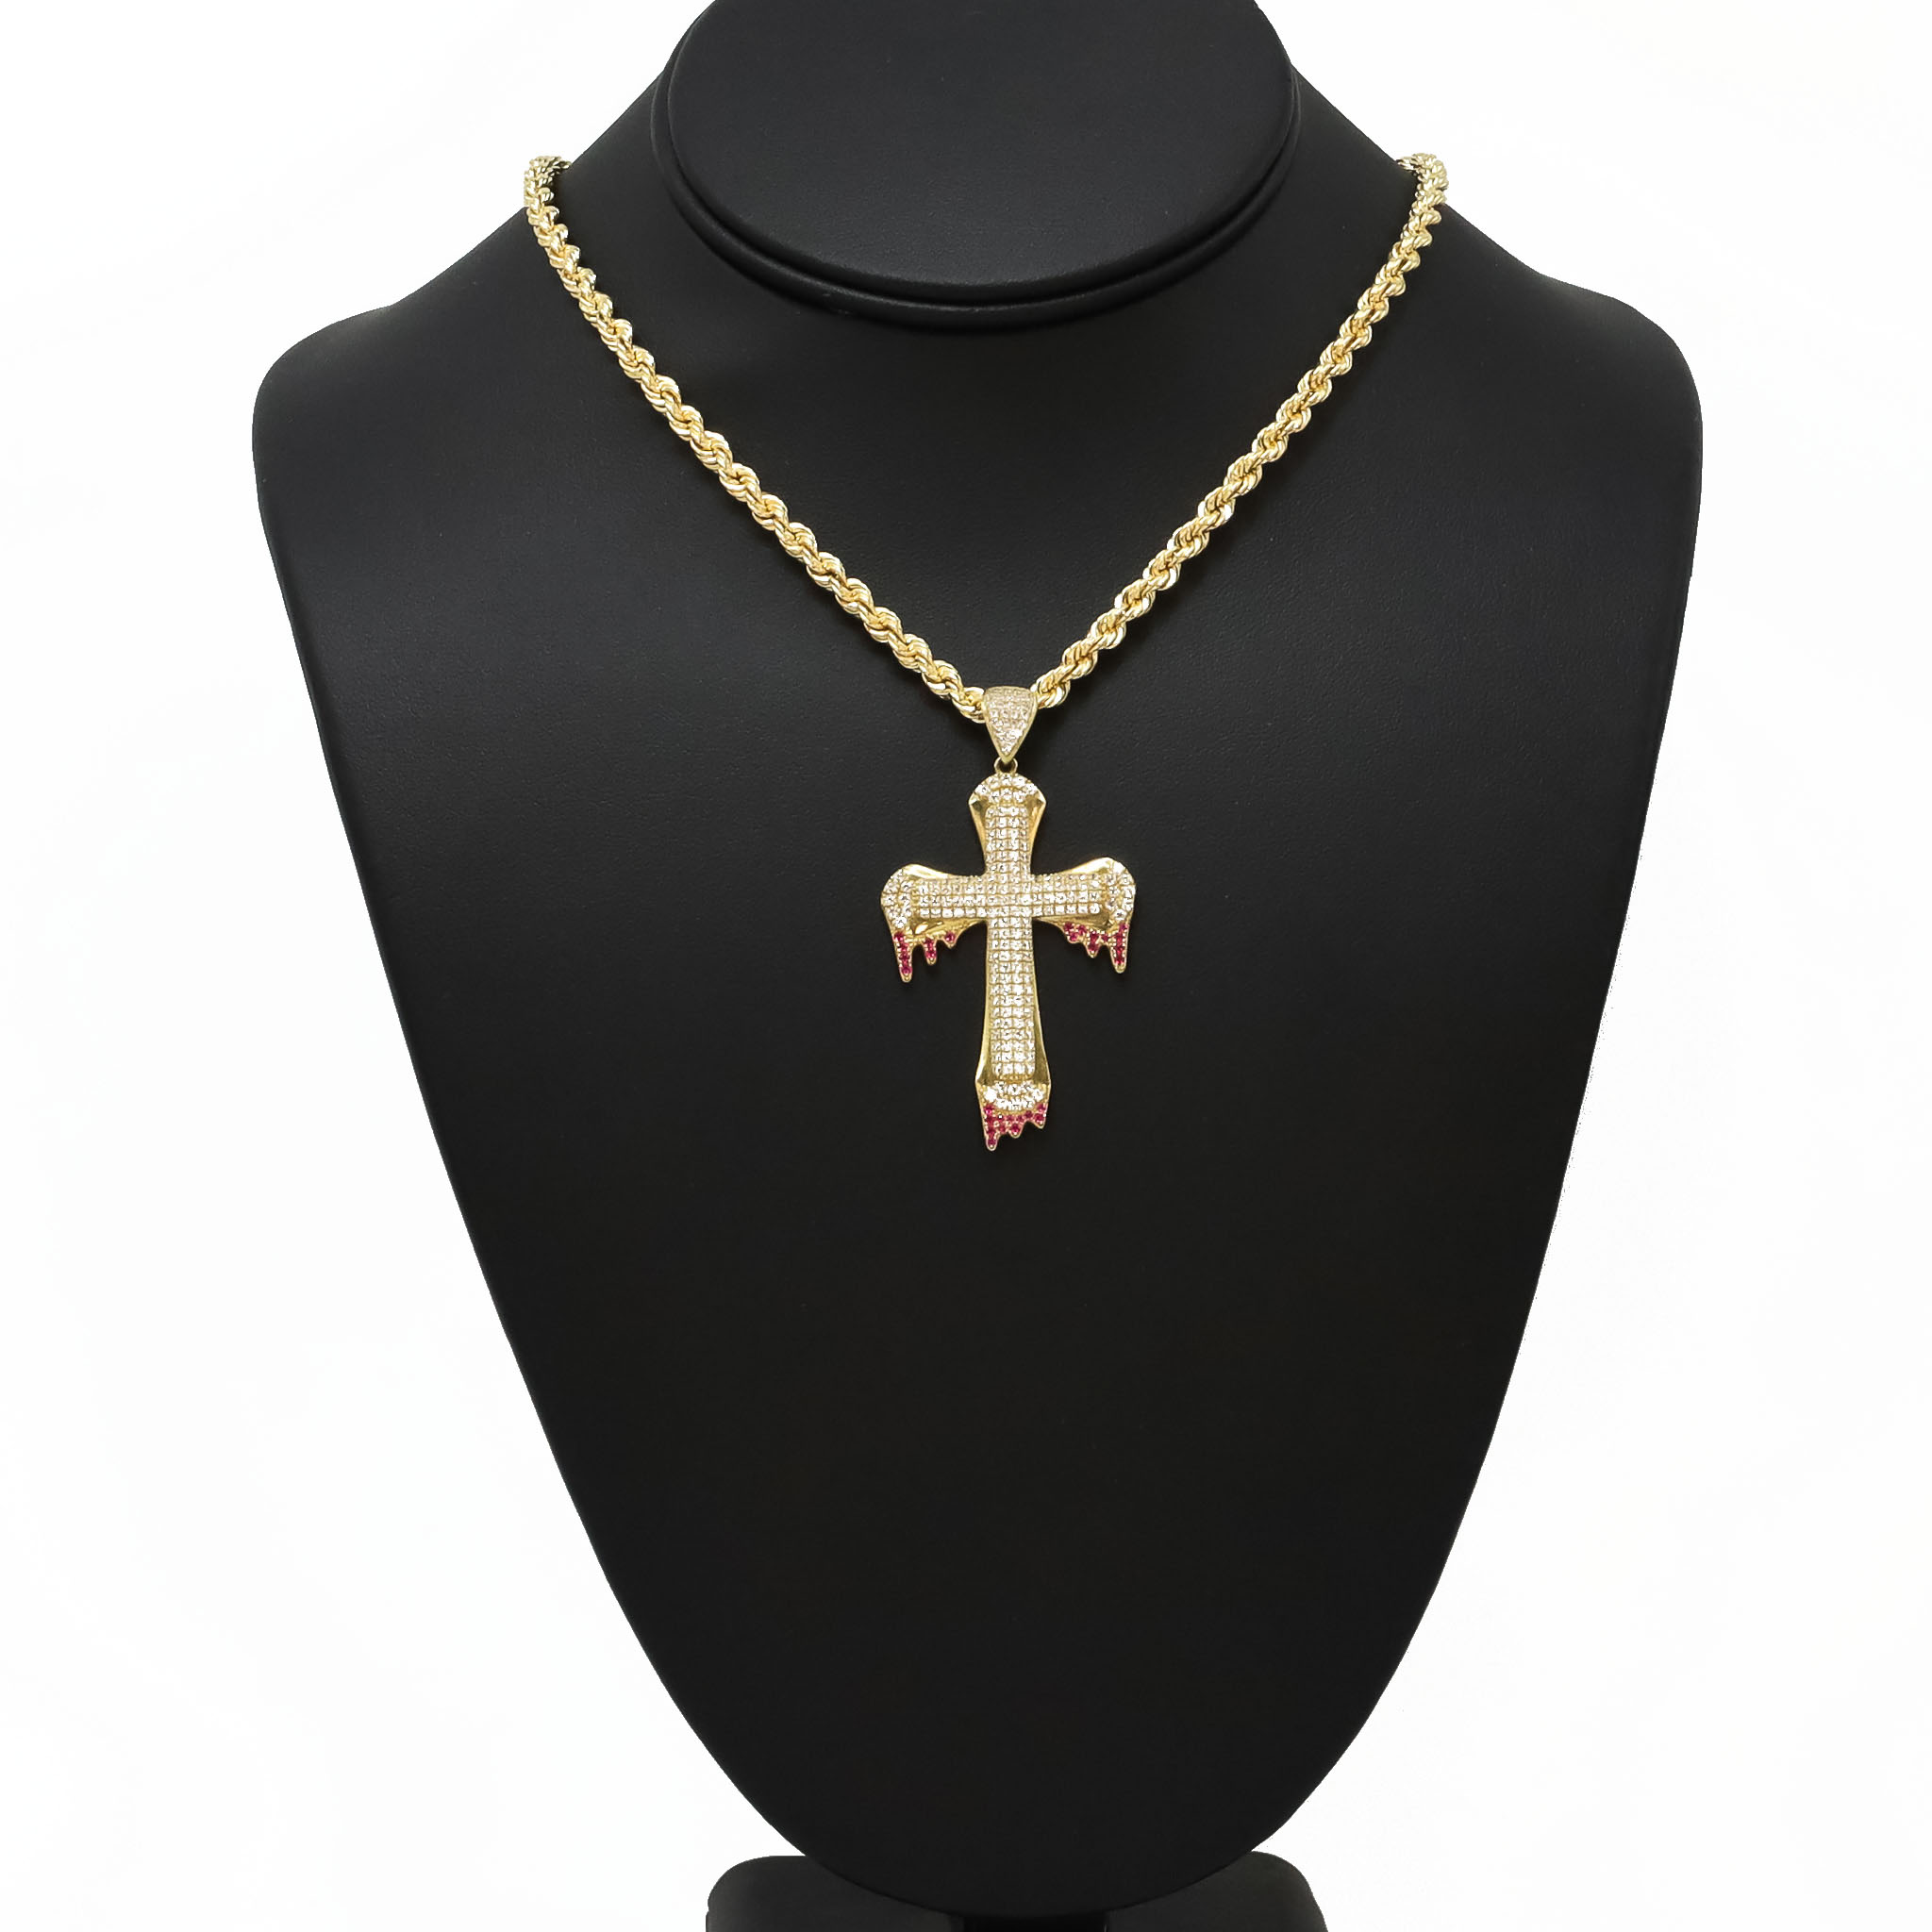 Men's Two-Tone Stainless Steel Multi-Layer Cross Pendant Necklace - The Art  of the Icon